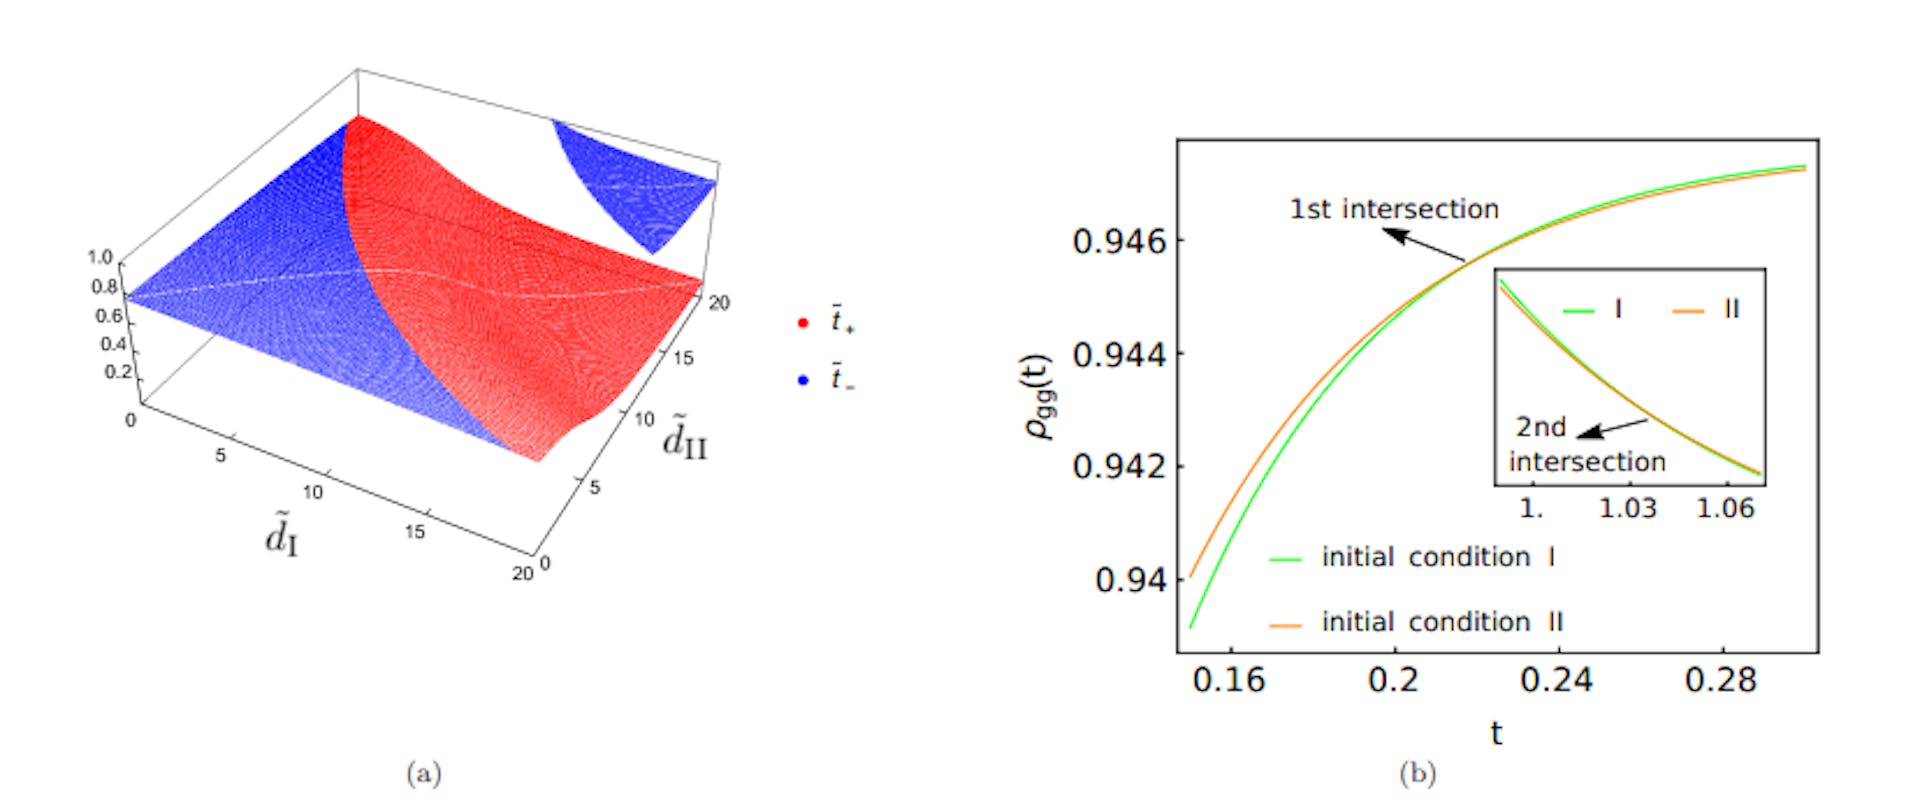 FIG. 12. The figure (a) shows the intersection time solutions [Eq. (C11)] in region (b) as functions of the control parameters d˜I and d˜II. Some of the regimes show finite and positive values of both t˜+ and t˜−, implying double QMPE. Parameters used are d˜ = 6.0, Γ˜I = Γ˜II = Γ = 6 ˜ √ 17 (from Eq. (C8)). The figure (b) shows a specific example of double intersection (double QMPE) in ρgg(t). The main figure shows the first intersection. The inset shows much weaker second intersection. Parameters additionally used for (b) are ˜dI = 16.3, ˜dII = 13.4.